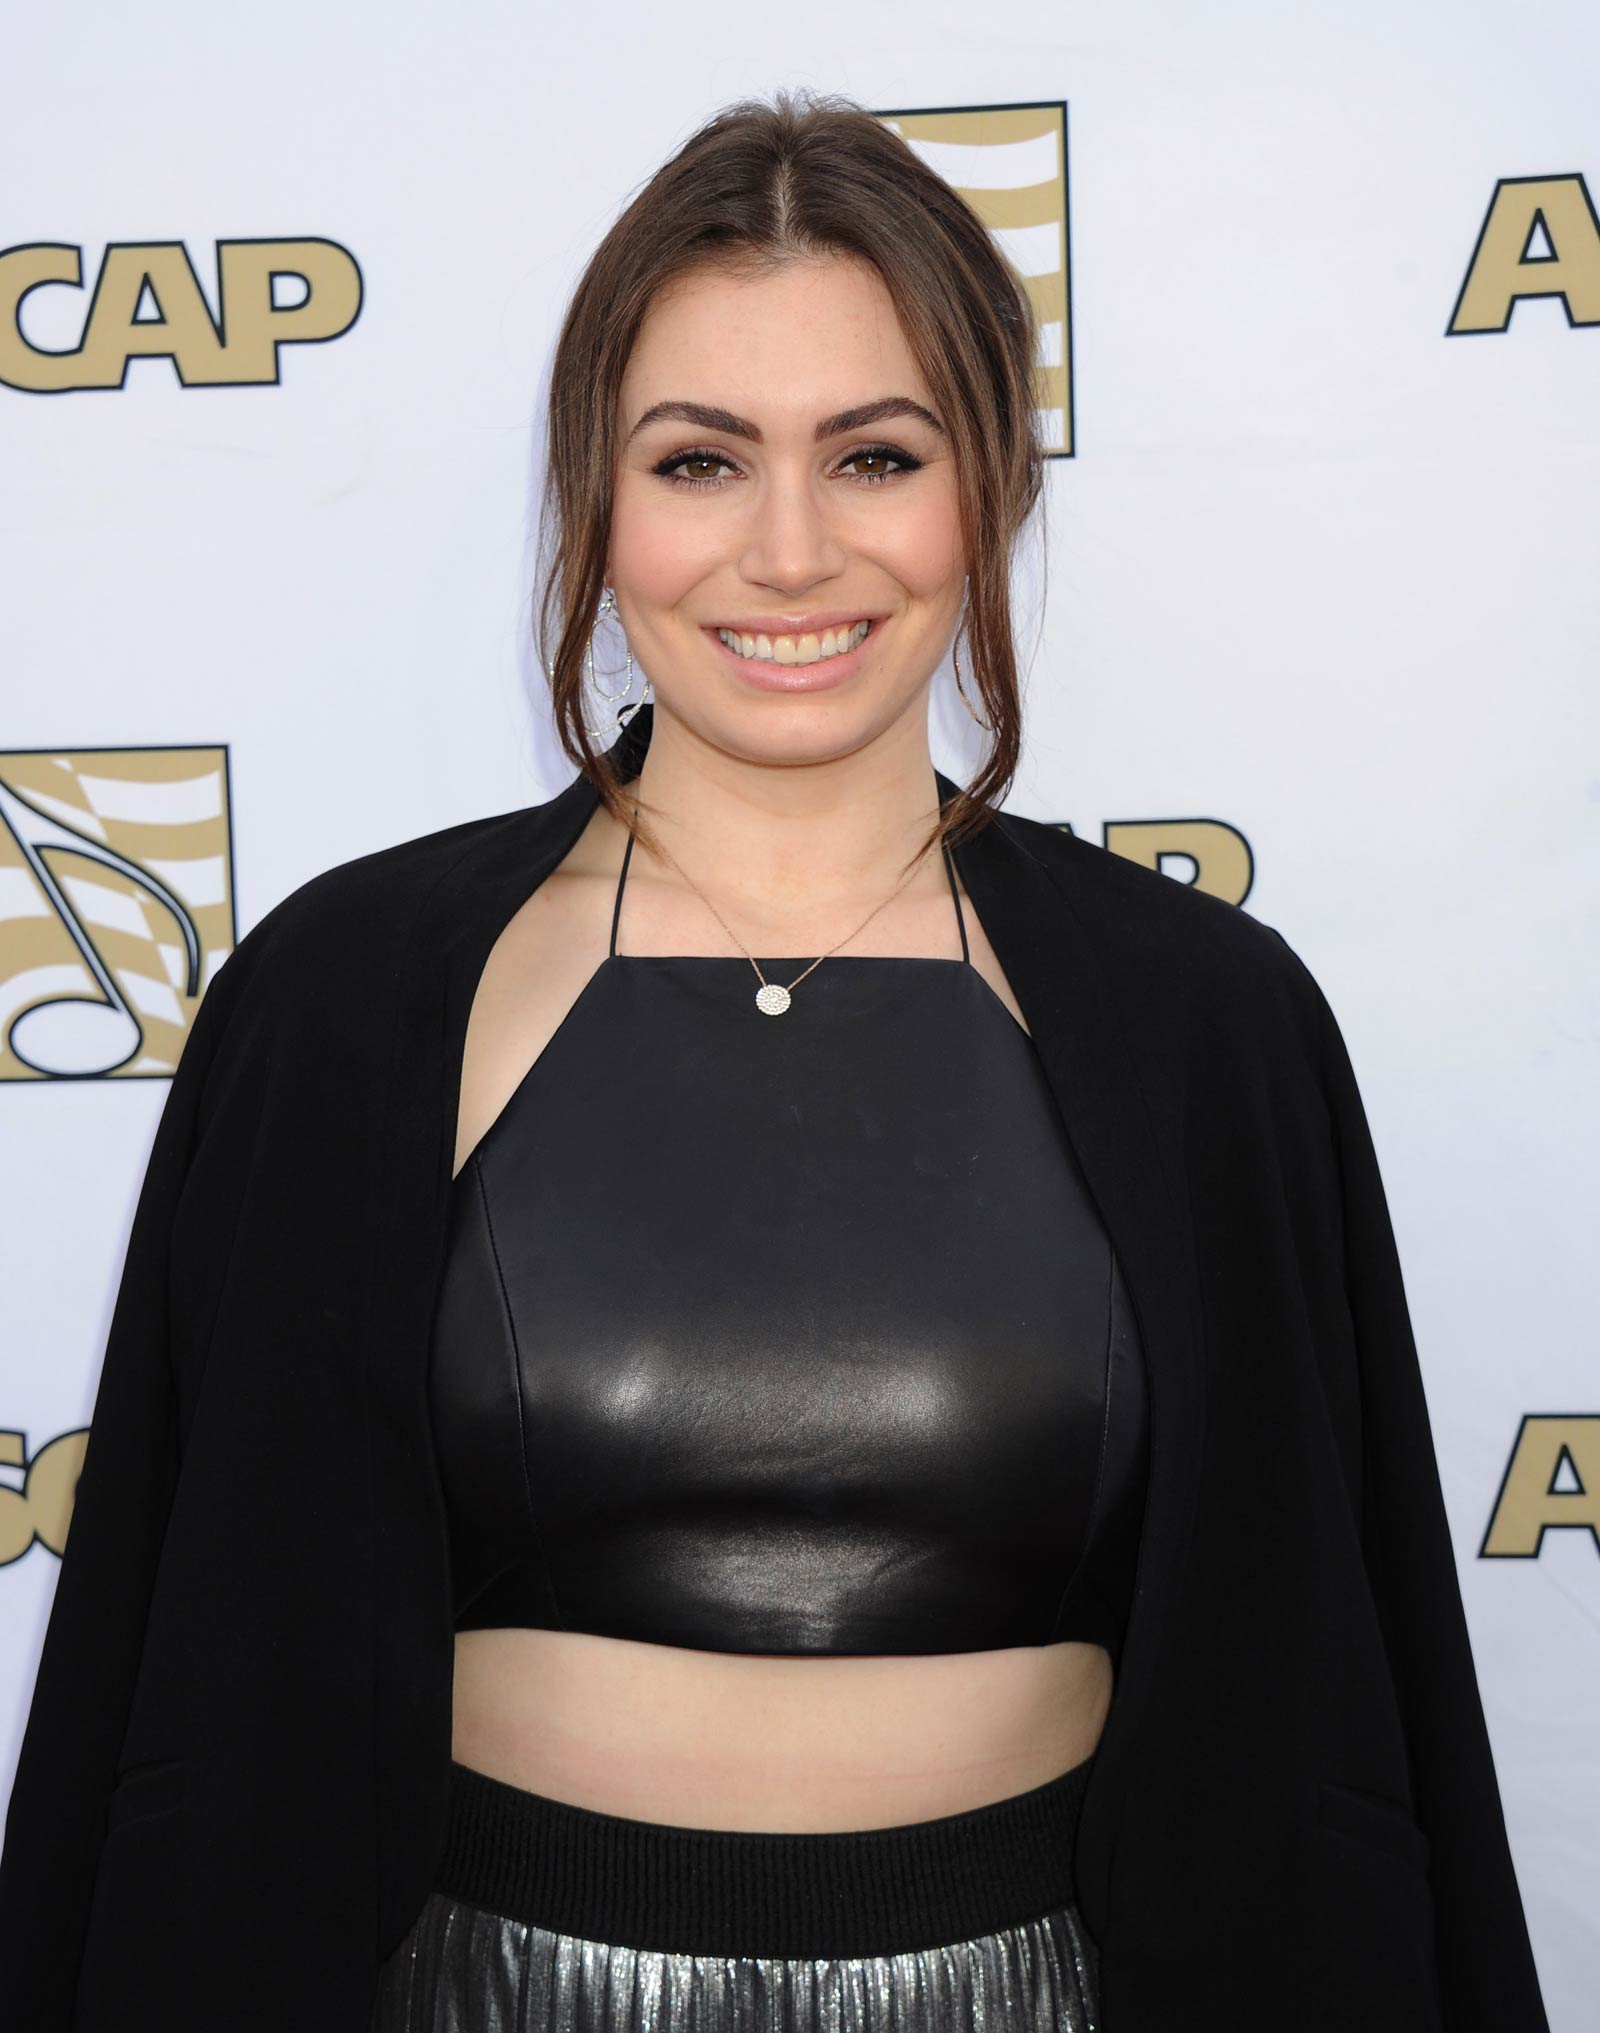 Sophie Simmons attends 32nd Annual ASCAP Pop Music Awards